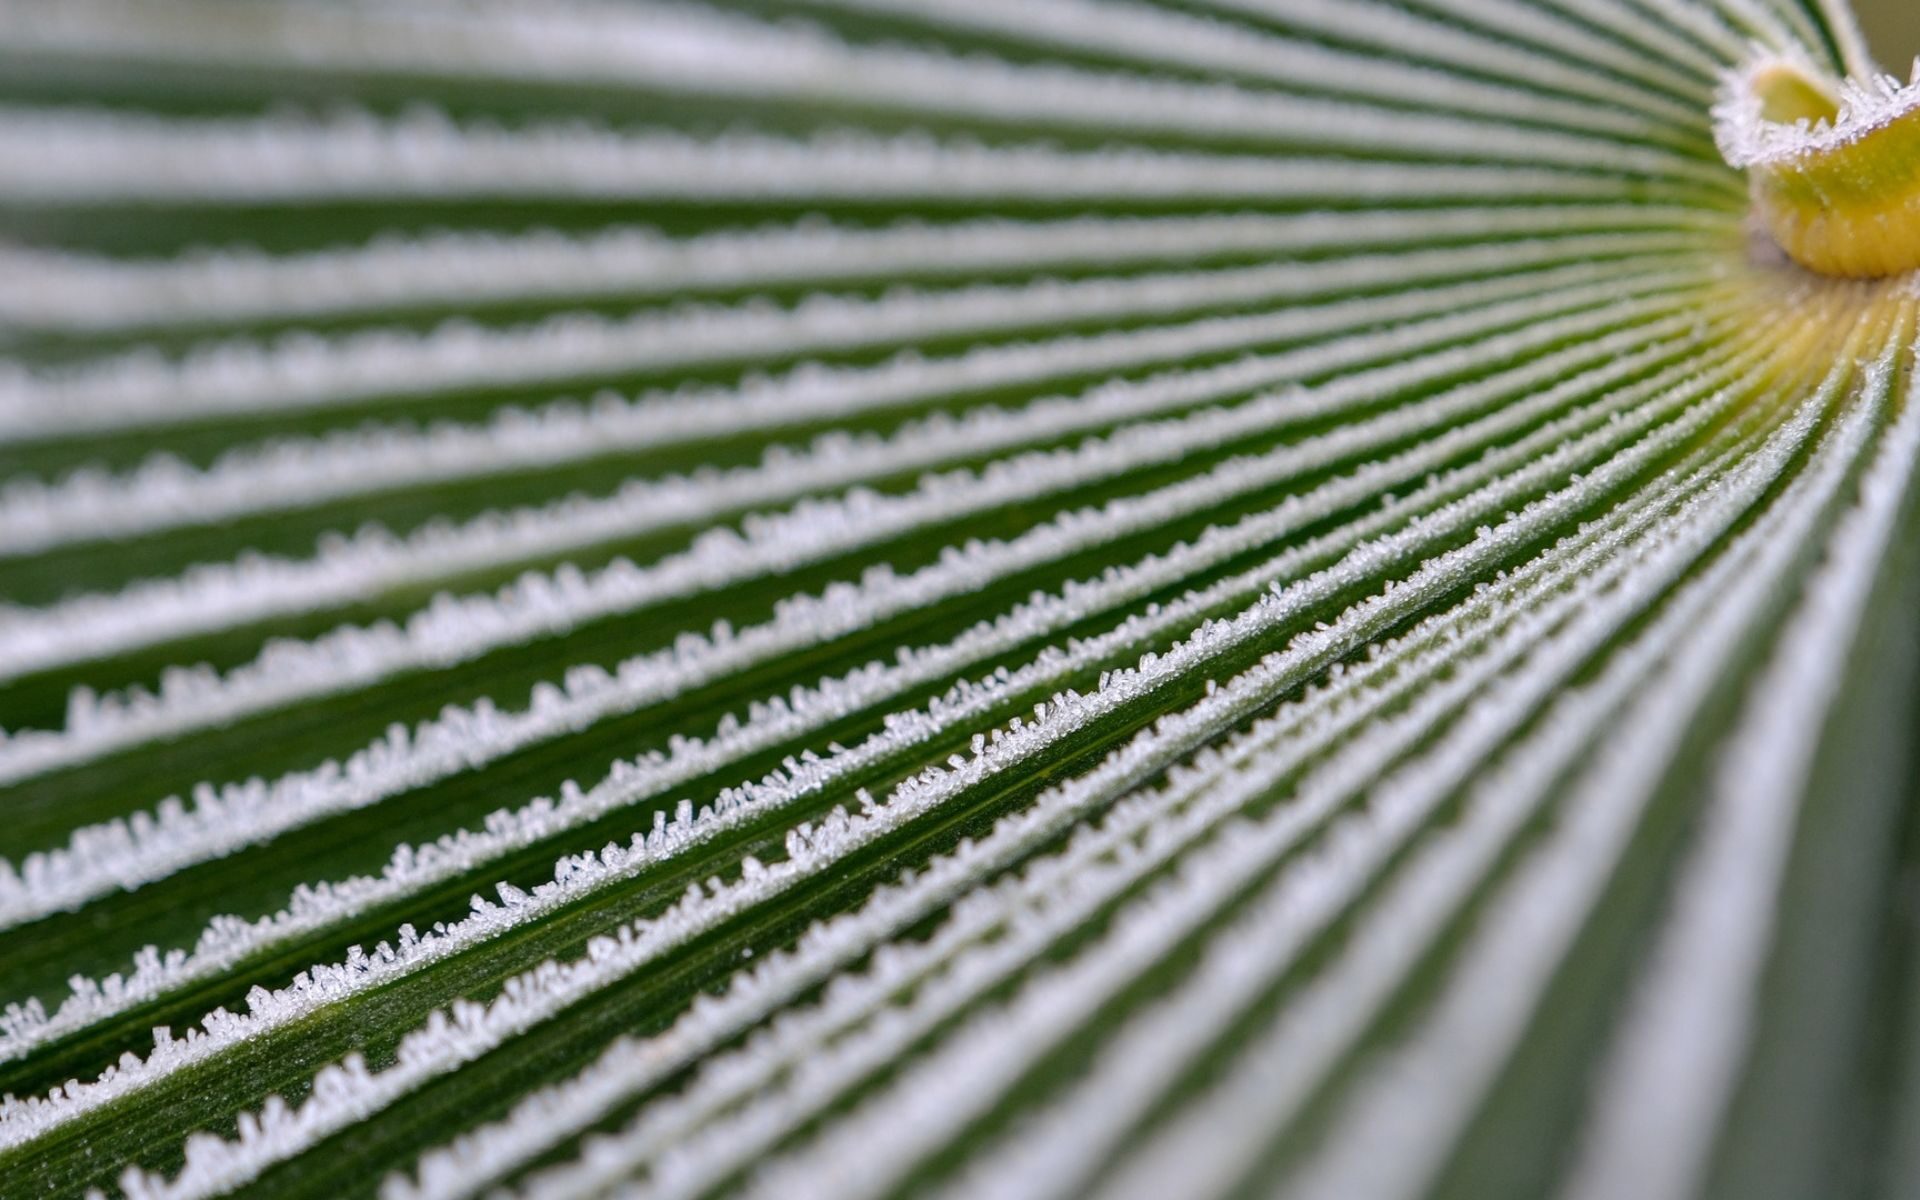 Frost on palm fronds in South Florida.